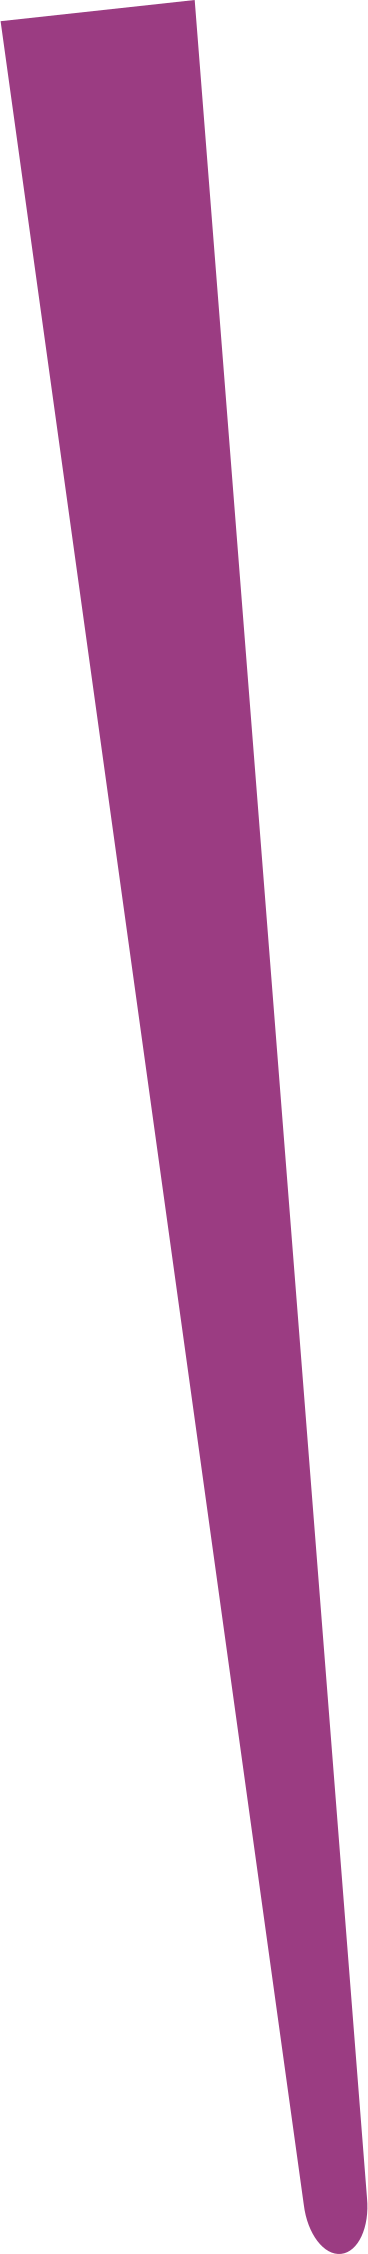 Lower burgundy part of the table в PNG, SVG